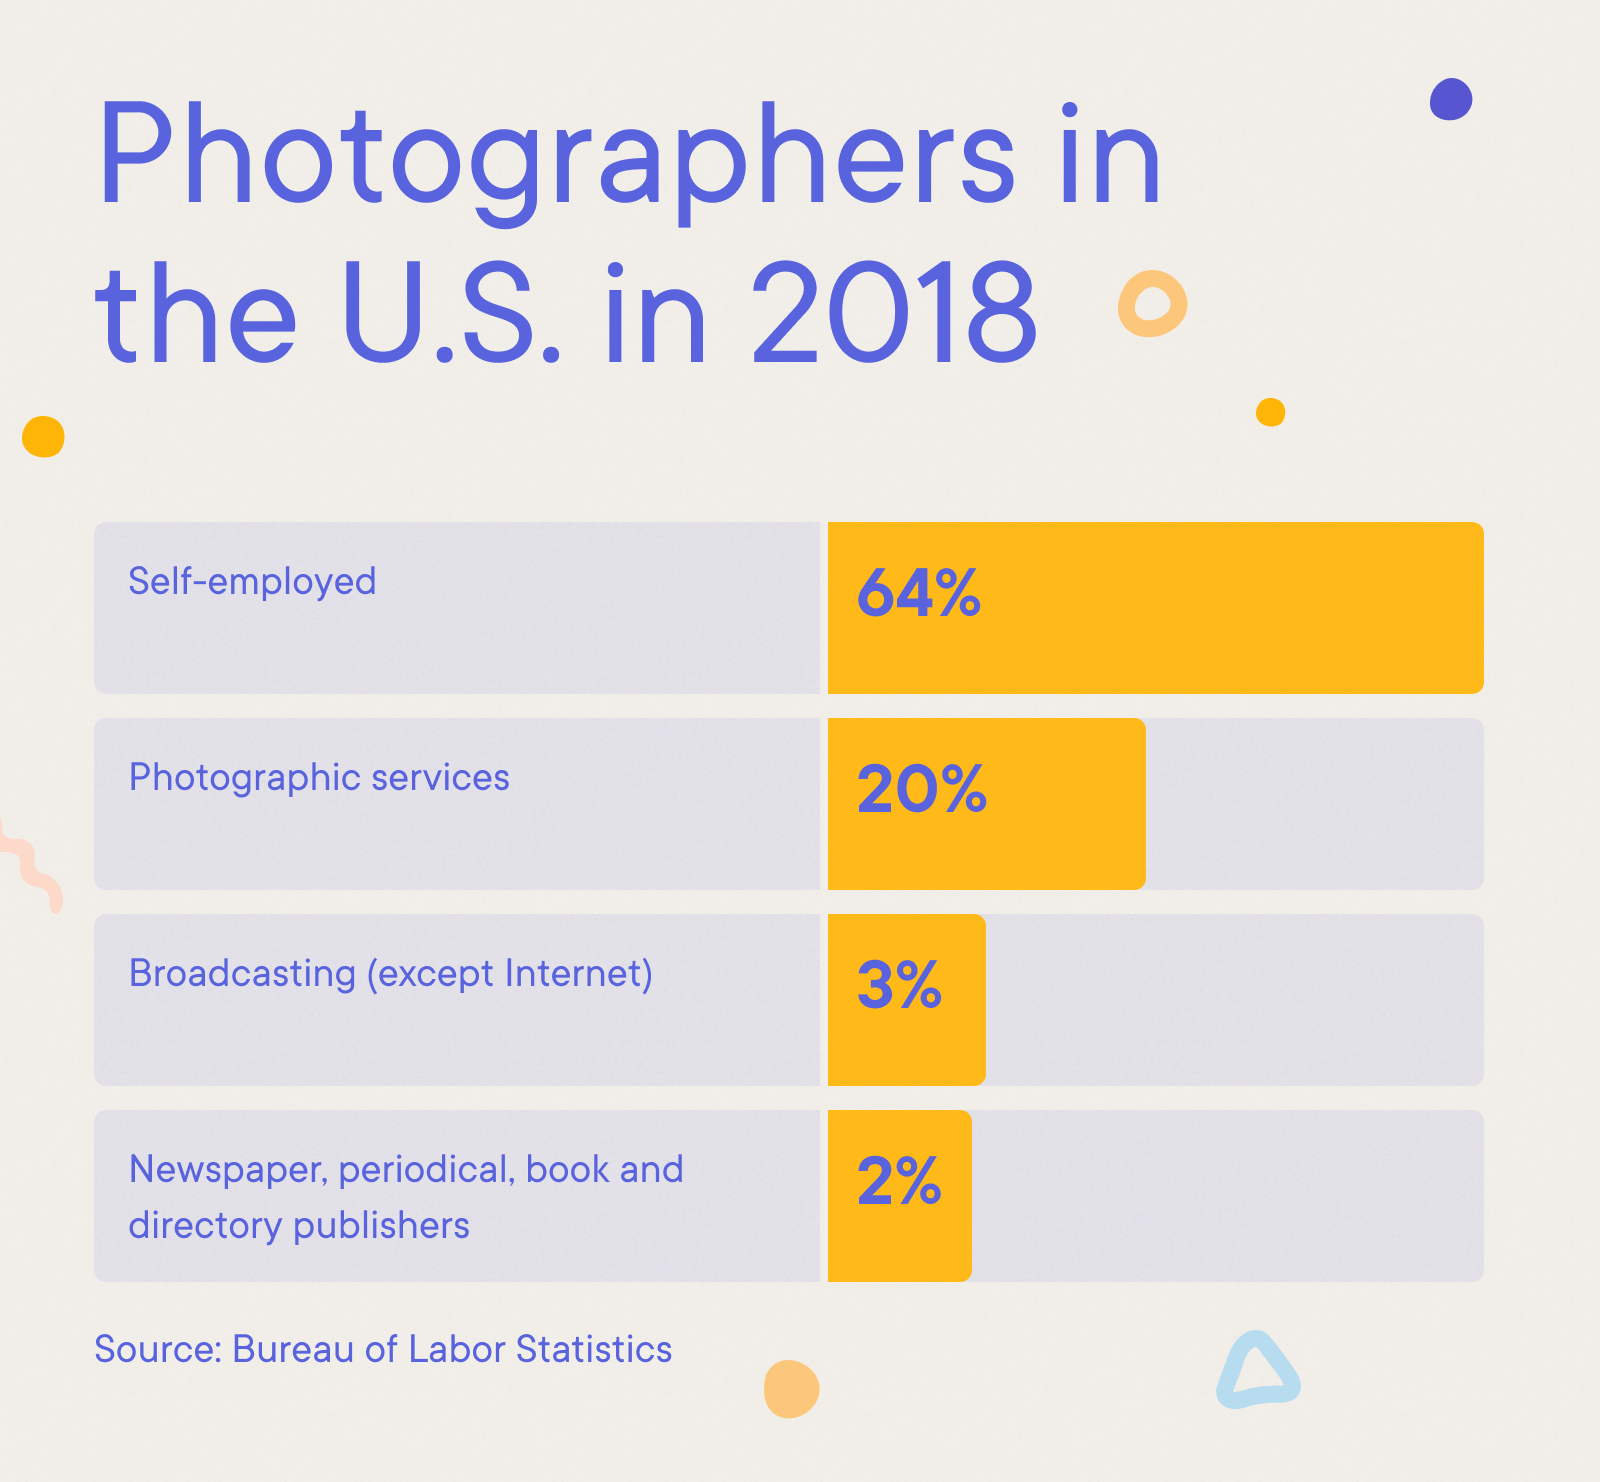 Photographer - Photographers in the U.S. in 2018